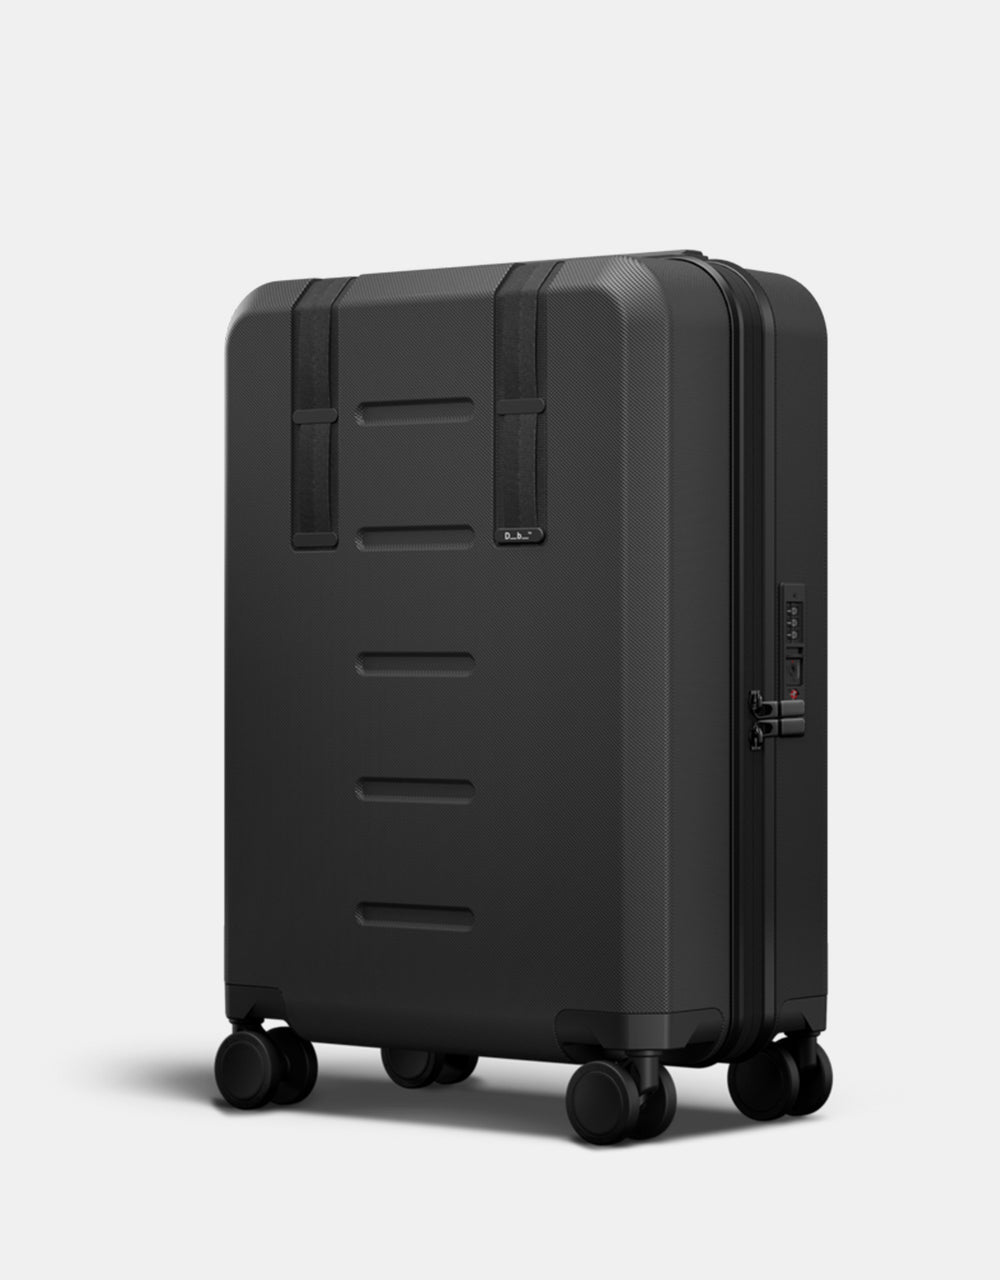 Db Ramverk Carry-On Luggage - Black Out